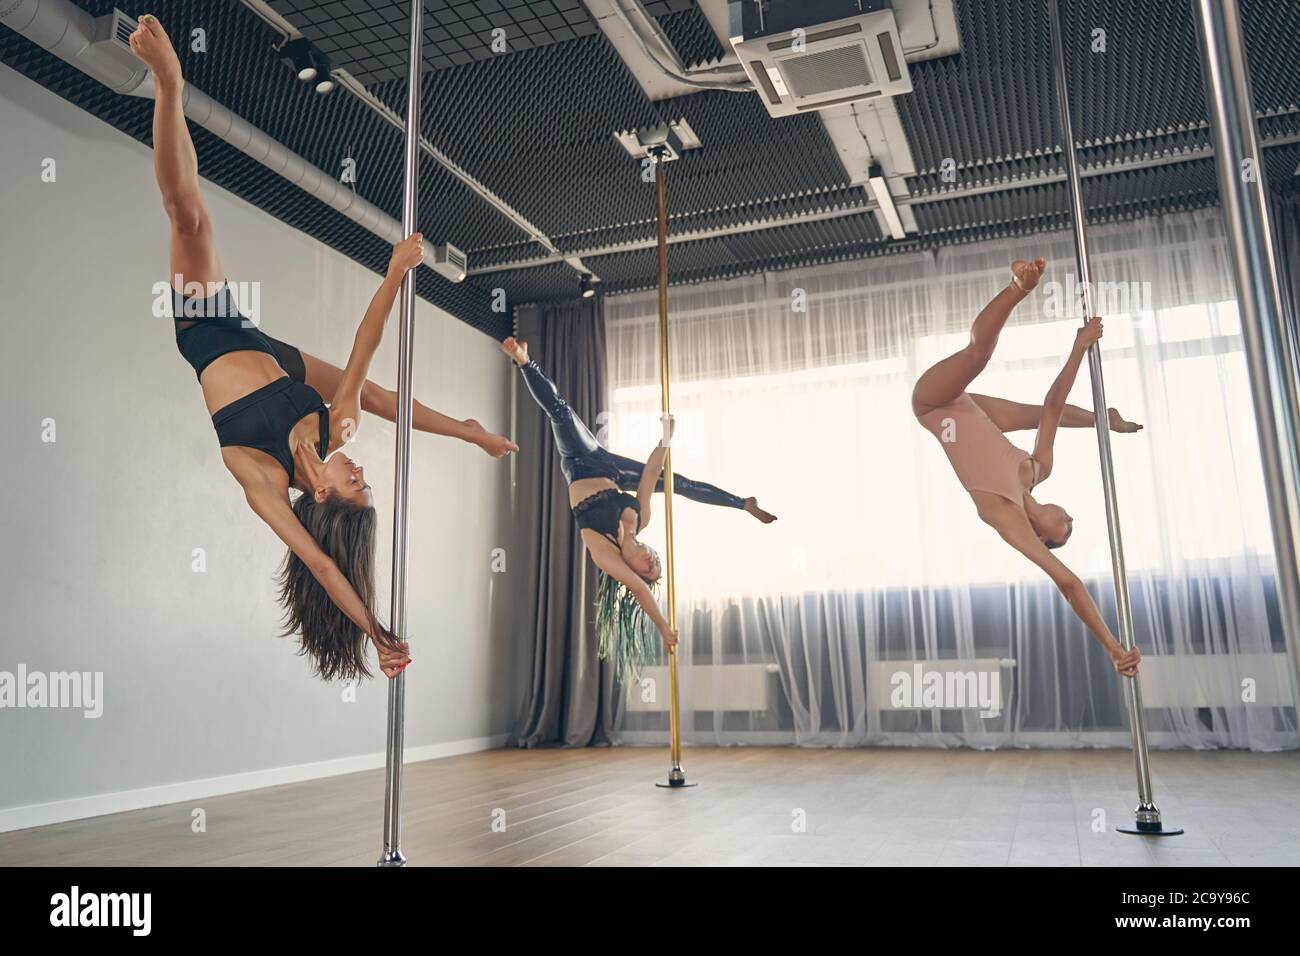 Group of beautiful young women performing pole dance tricks Stock Photo